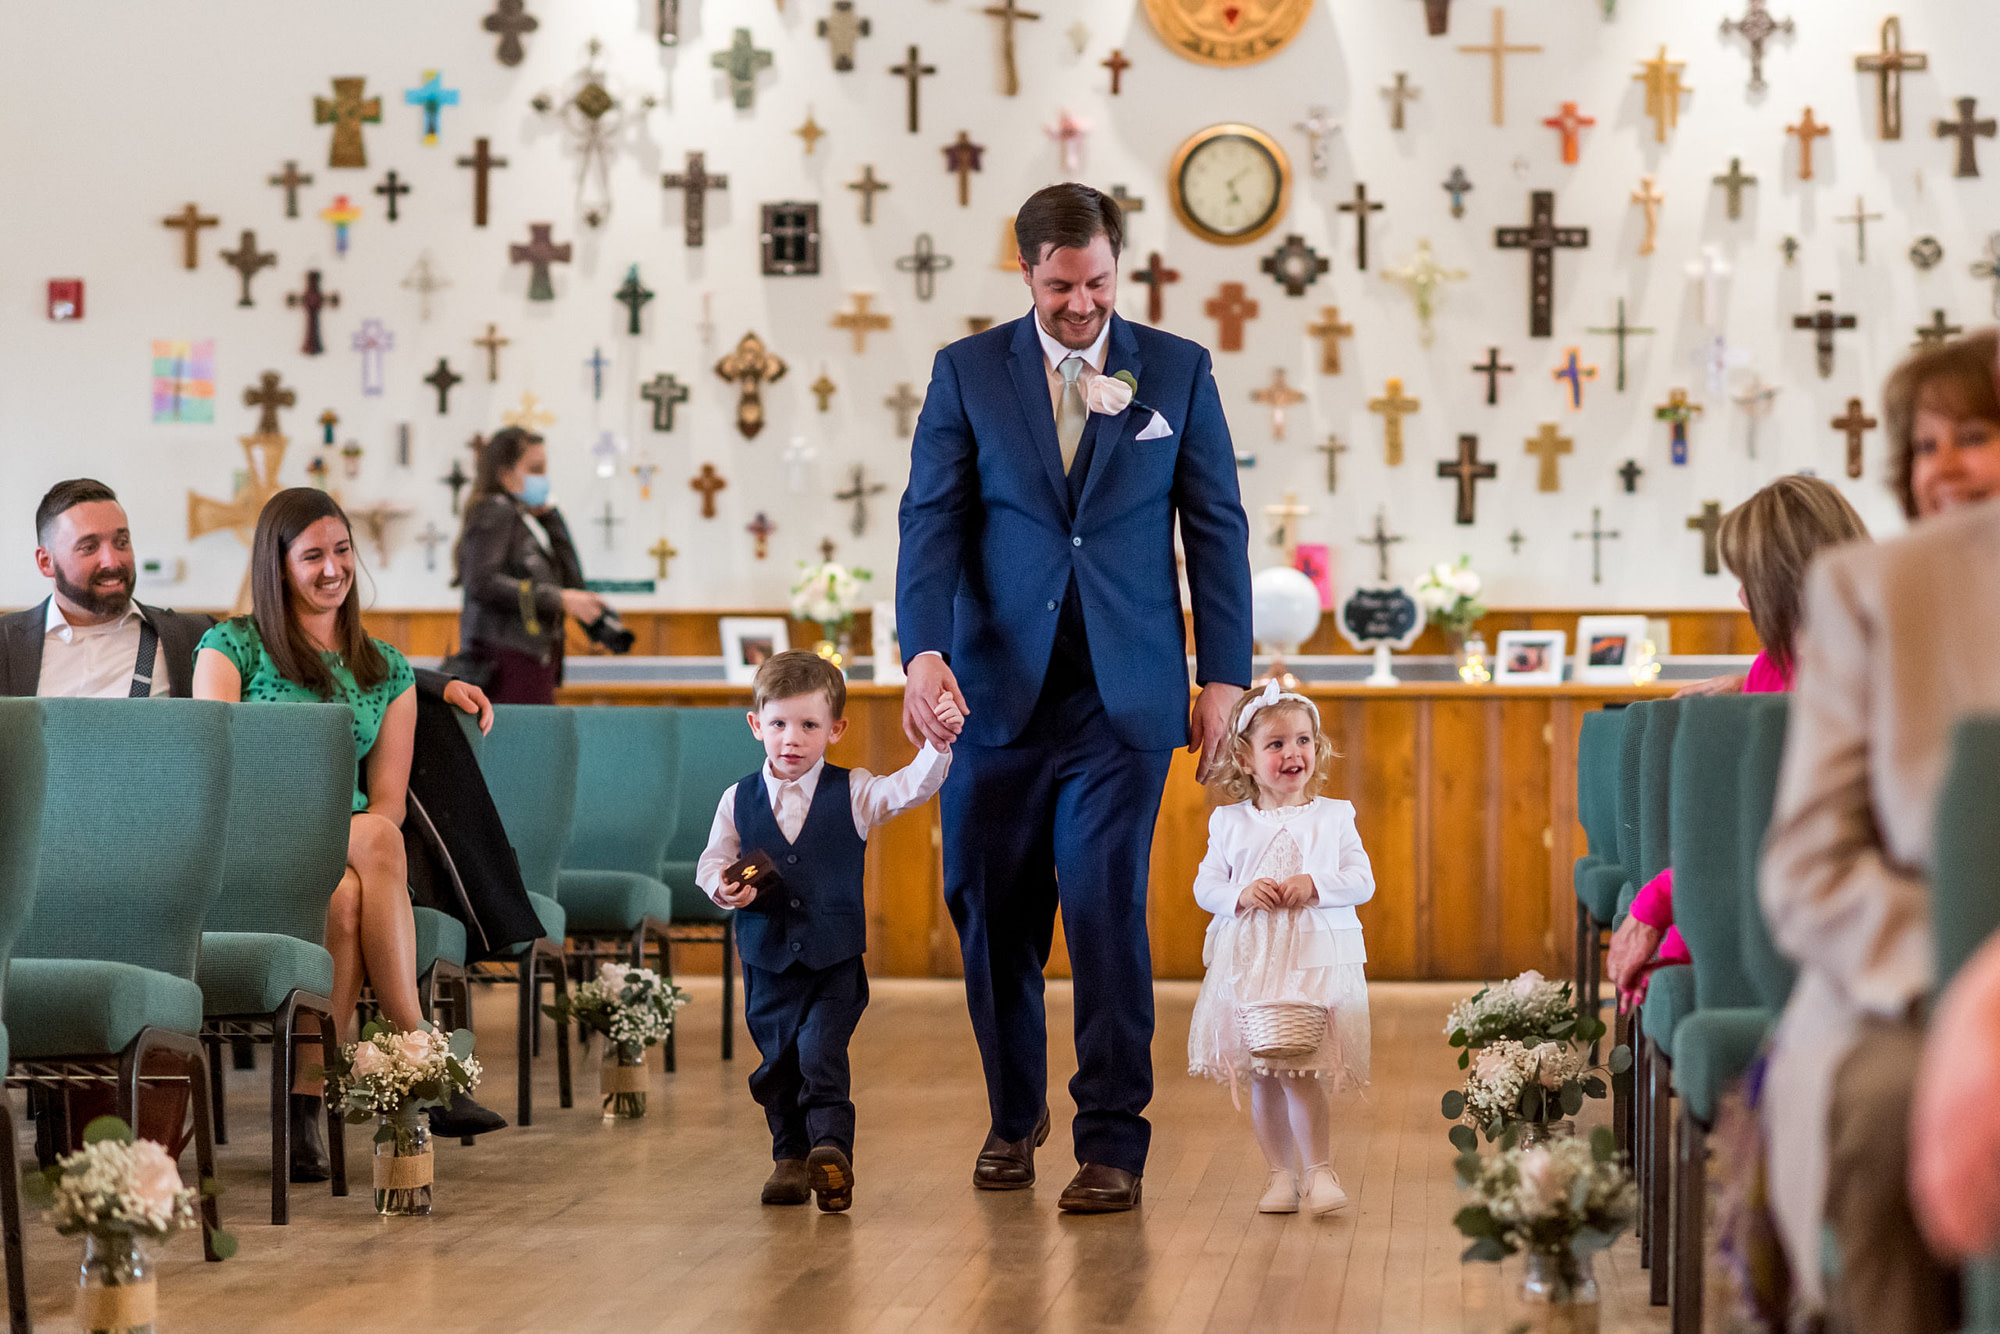 The flower girl and ring bearer process in during a YMCA of the Rockies wedding in Estes Park, Colorado.